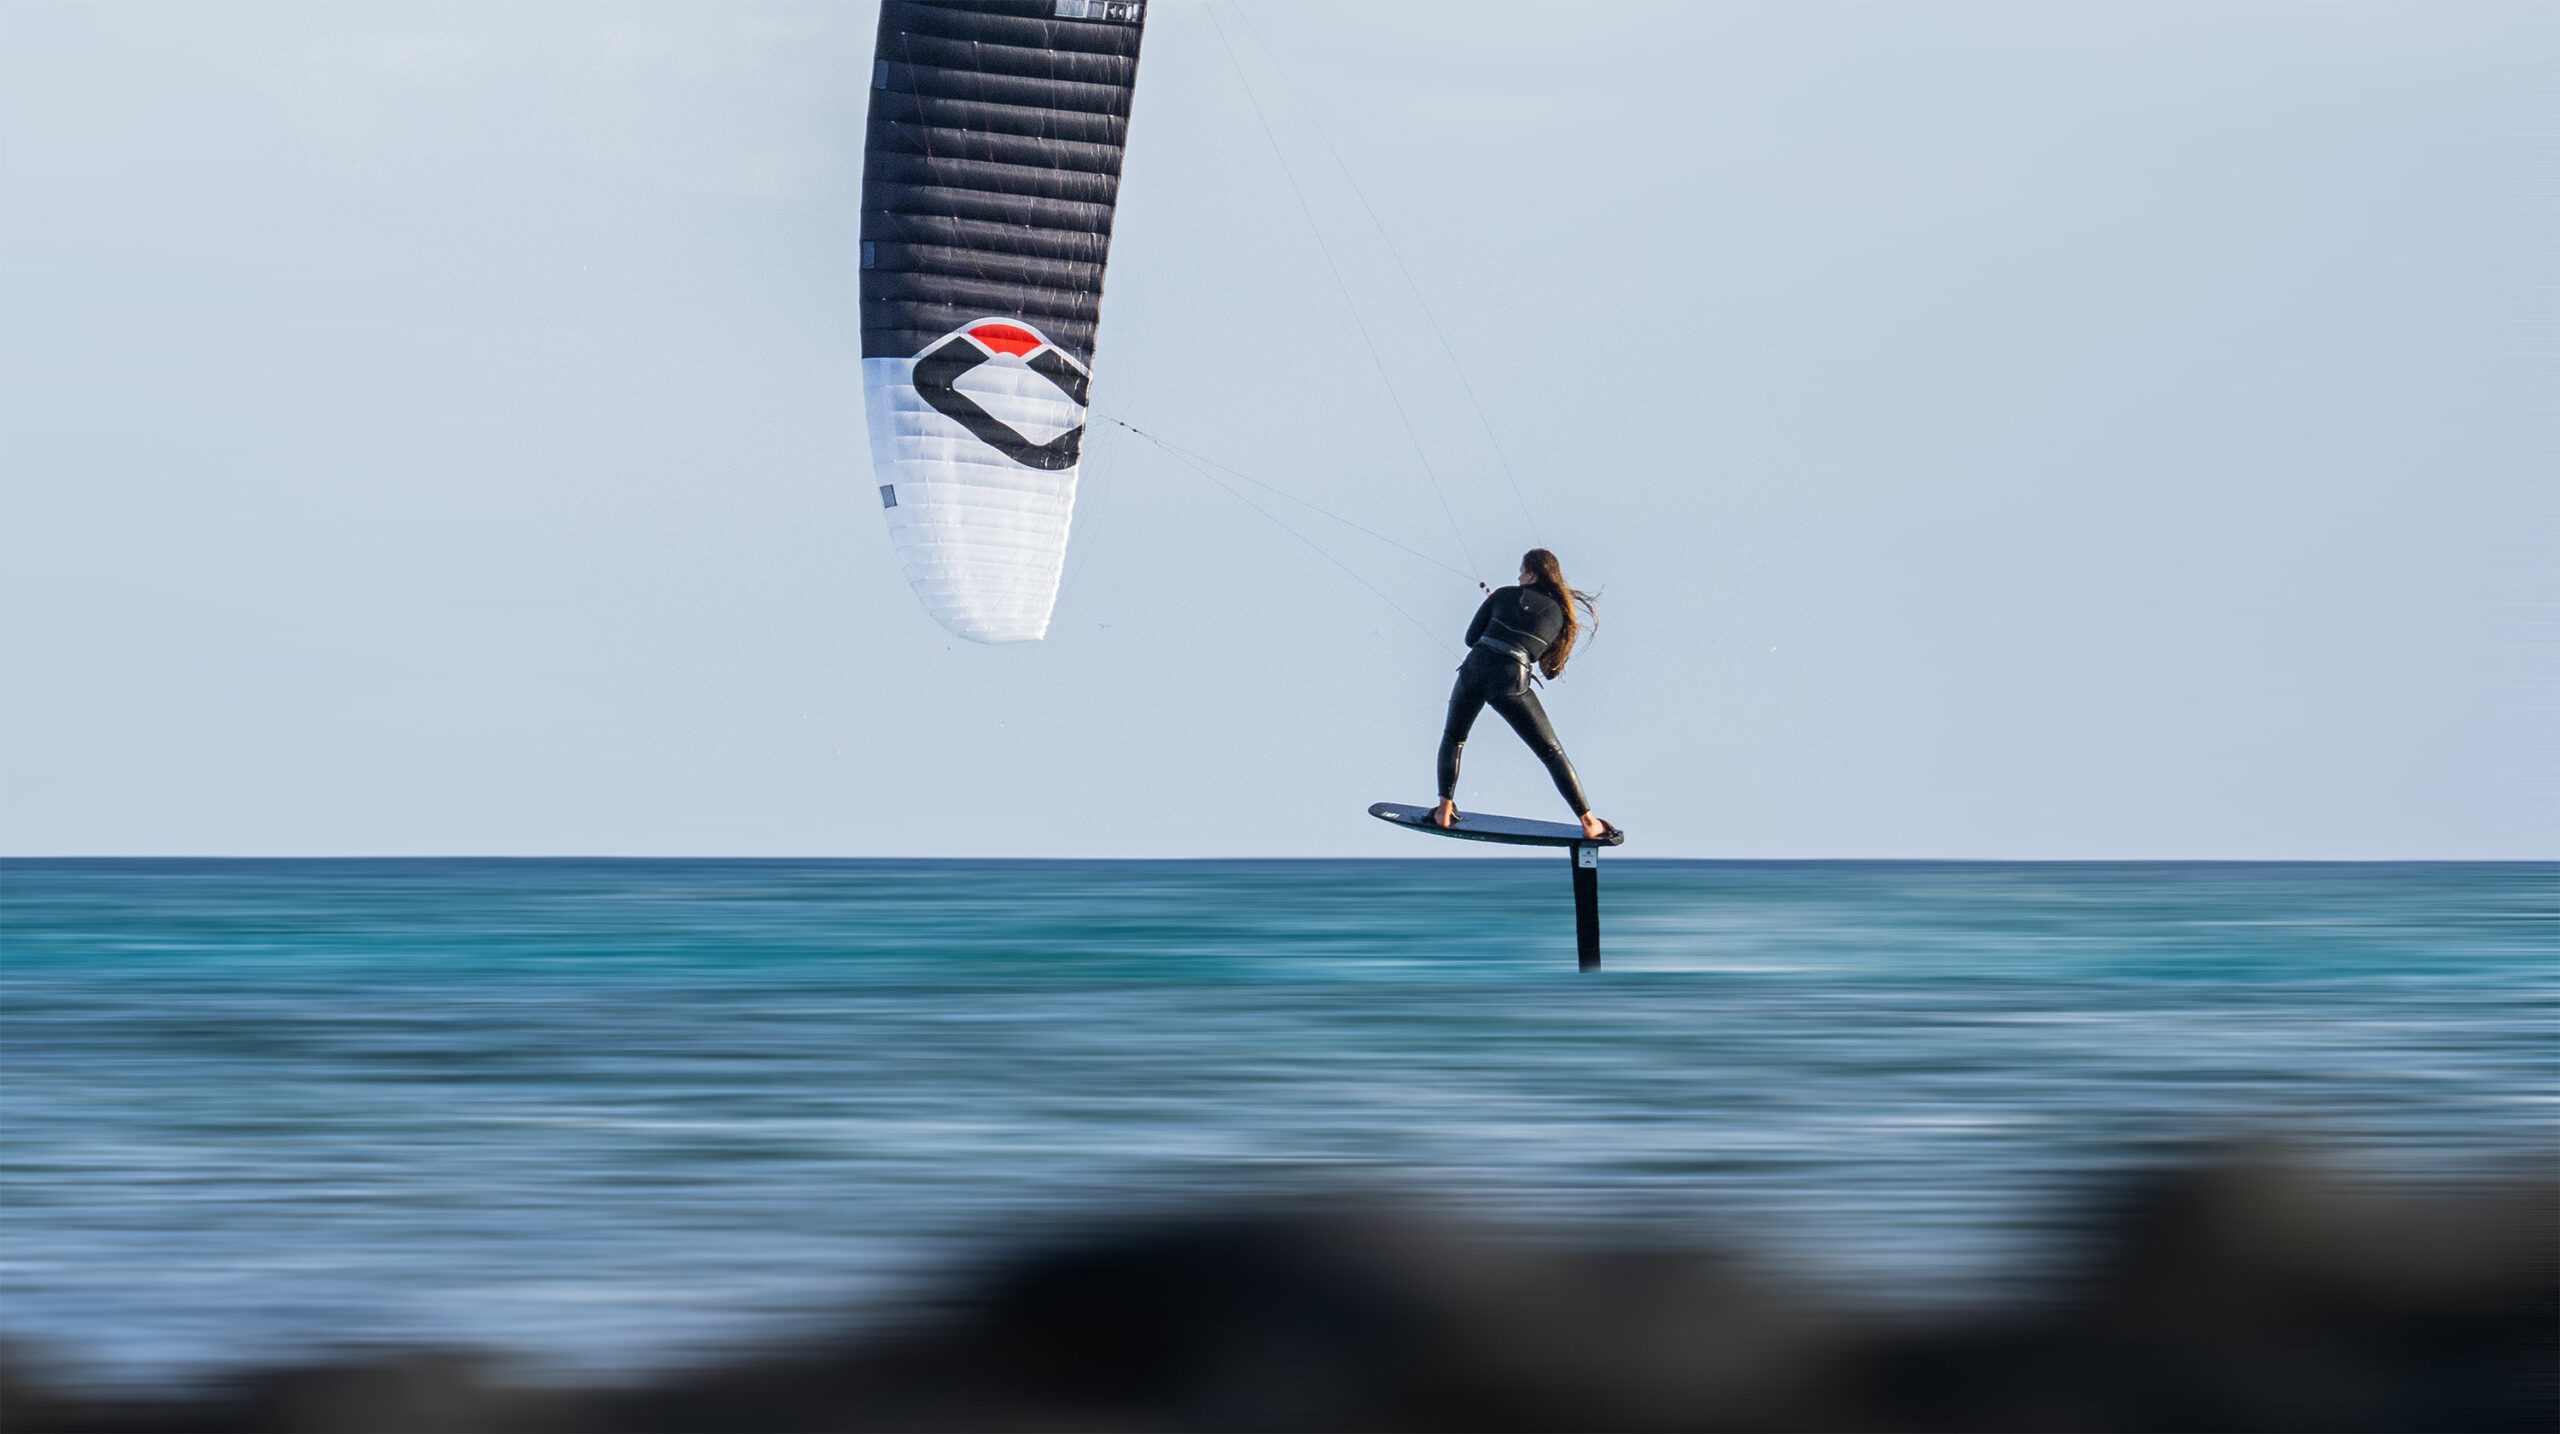 Gisela Pulido kitefoil racing on the Ozone R1